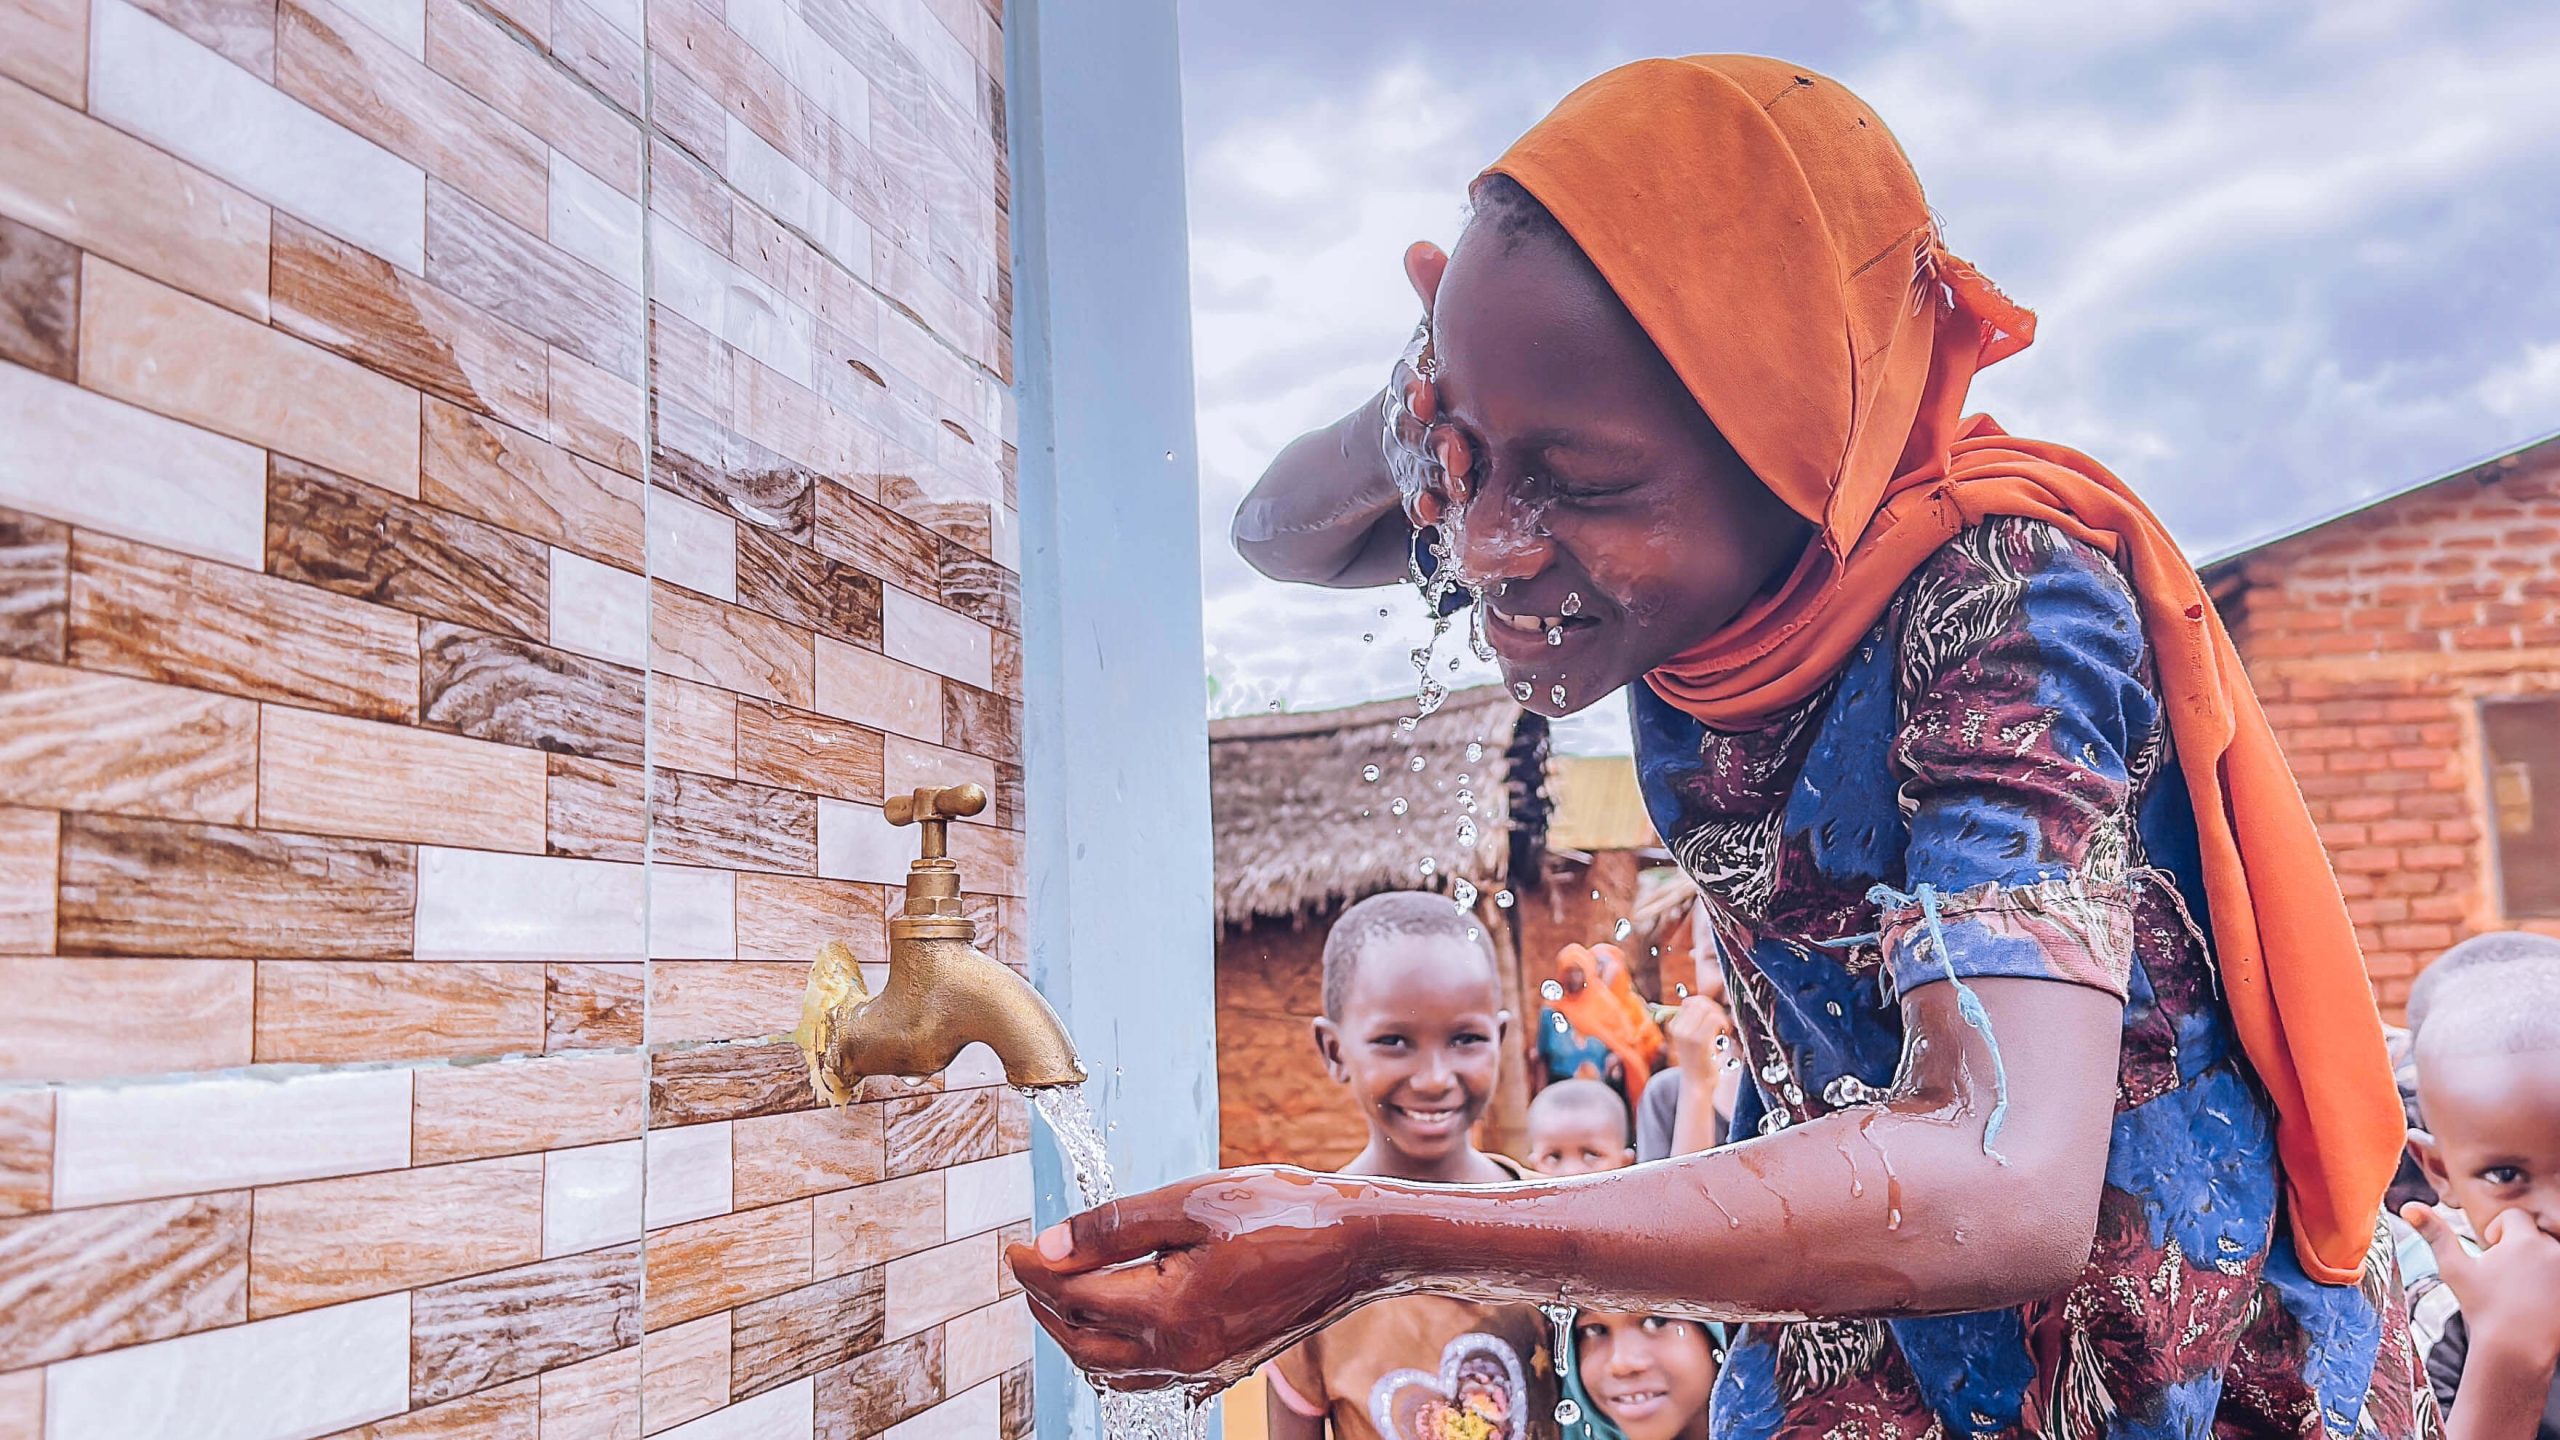 Build a water well in Africa? Why you don’t need to be Mr. Beast to help others